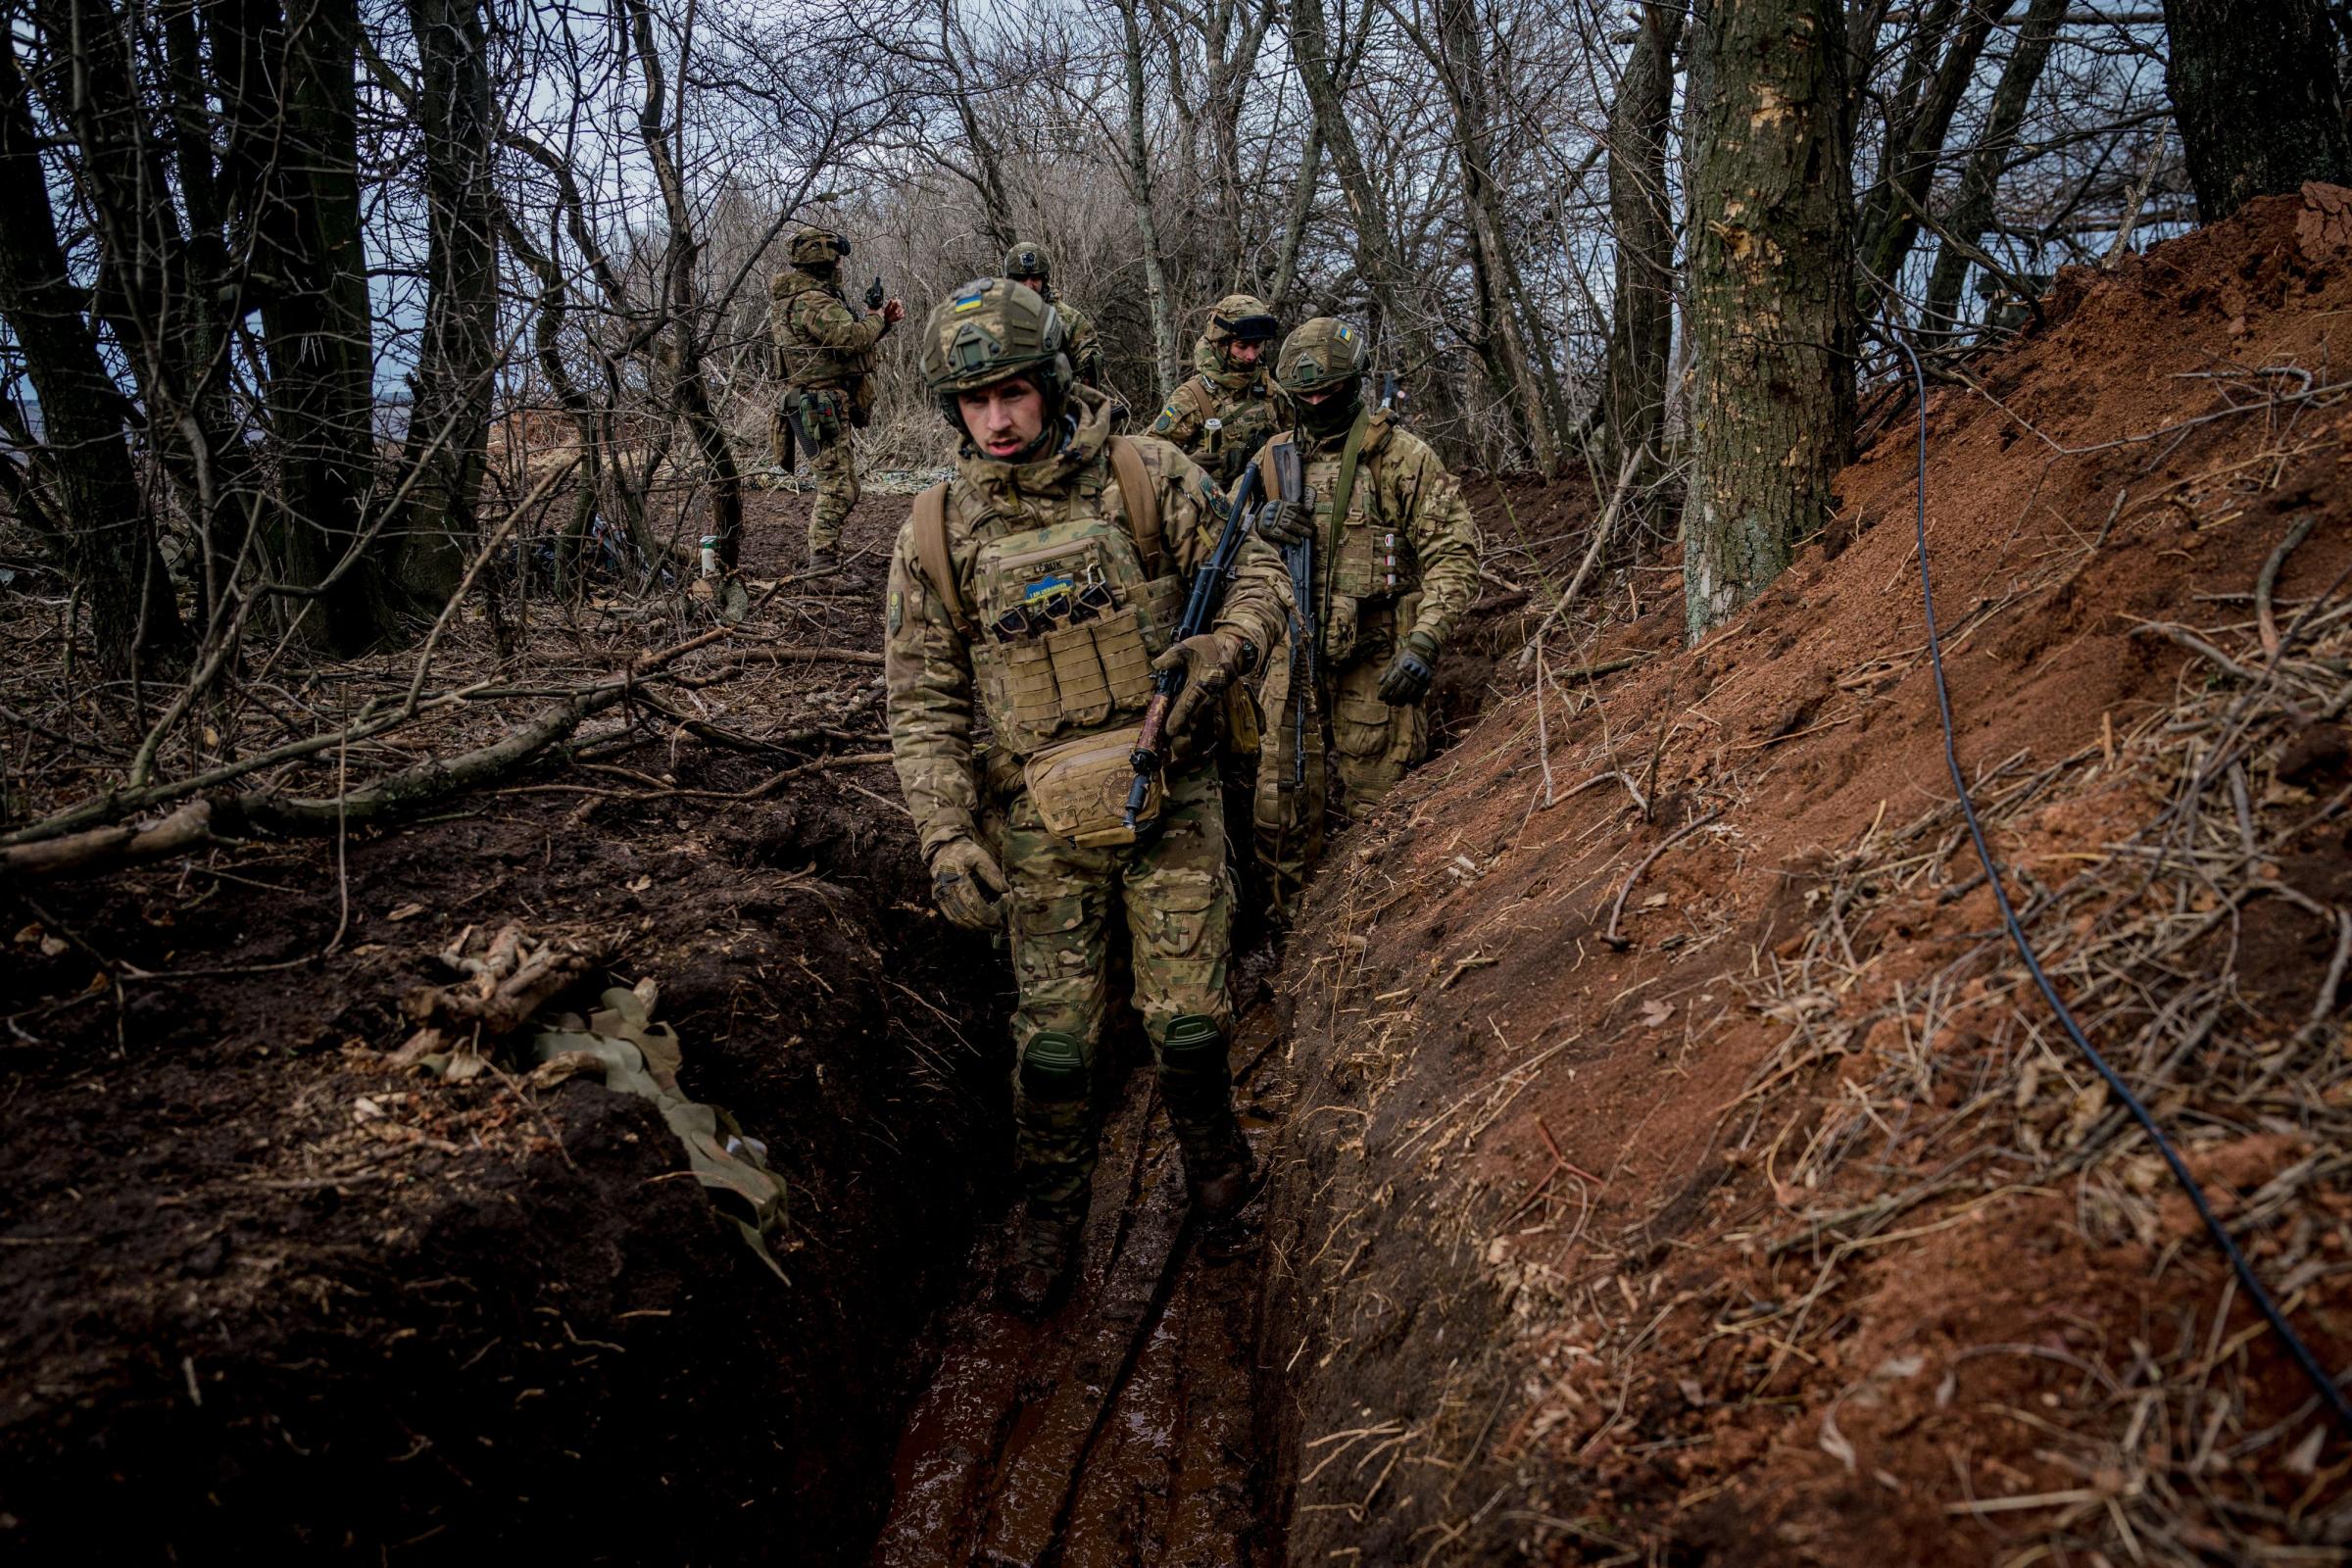 Ukrainian servicemen walk in a muddy trench near the frontline town of Bakhmut on March 2, 2023, amid the Russian invasion of Ukraine. (Photo by Dimitar DILKOFF / AFP) (Photo by DIMITAR DILKOFF/AFP via Getty Images).